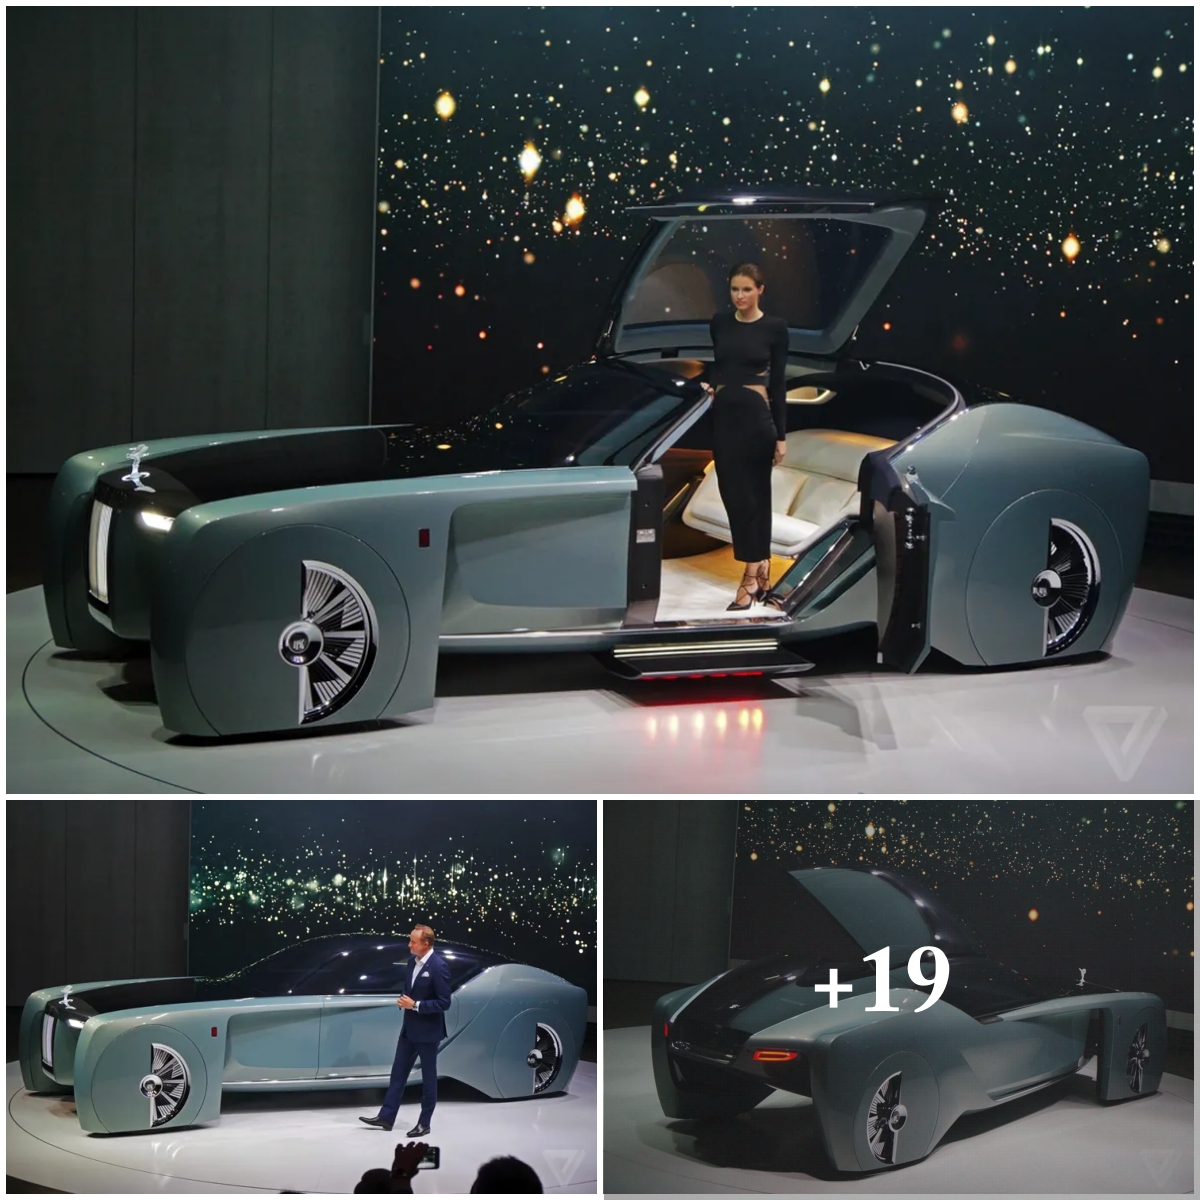 The Rolls-Royce Vision 100 concept is completely, irredeemably ridiculous